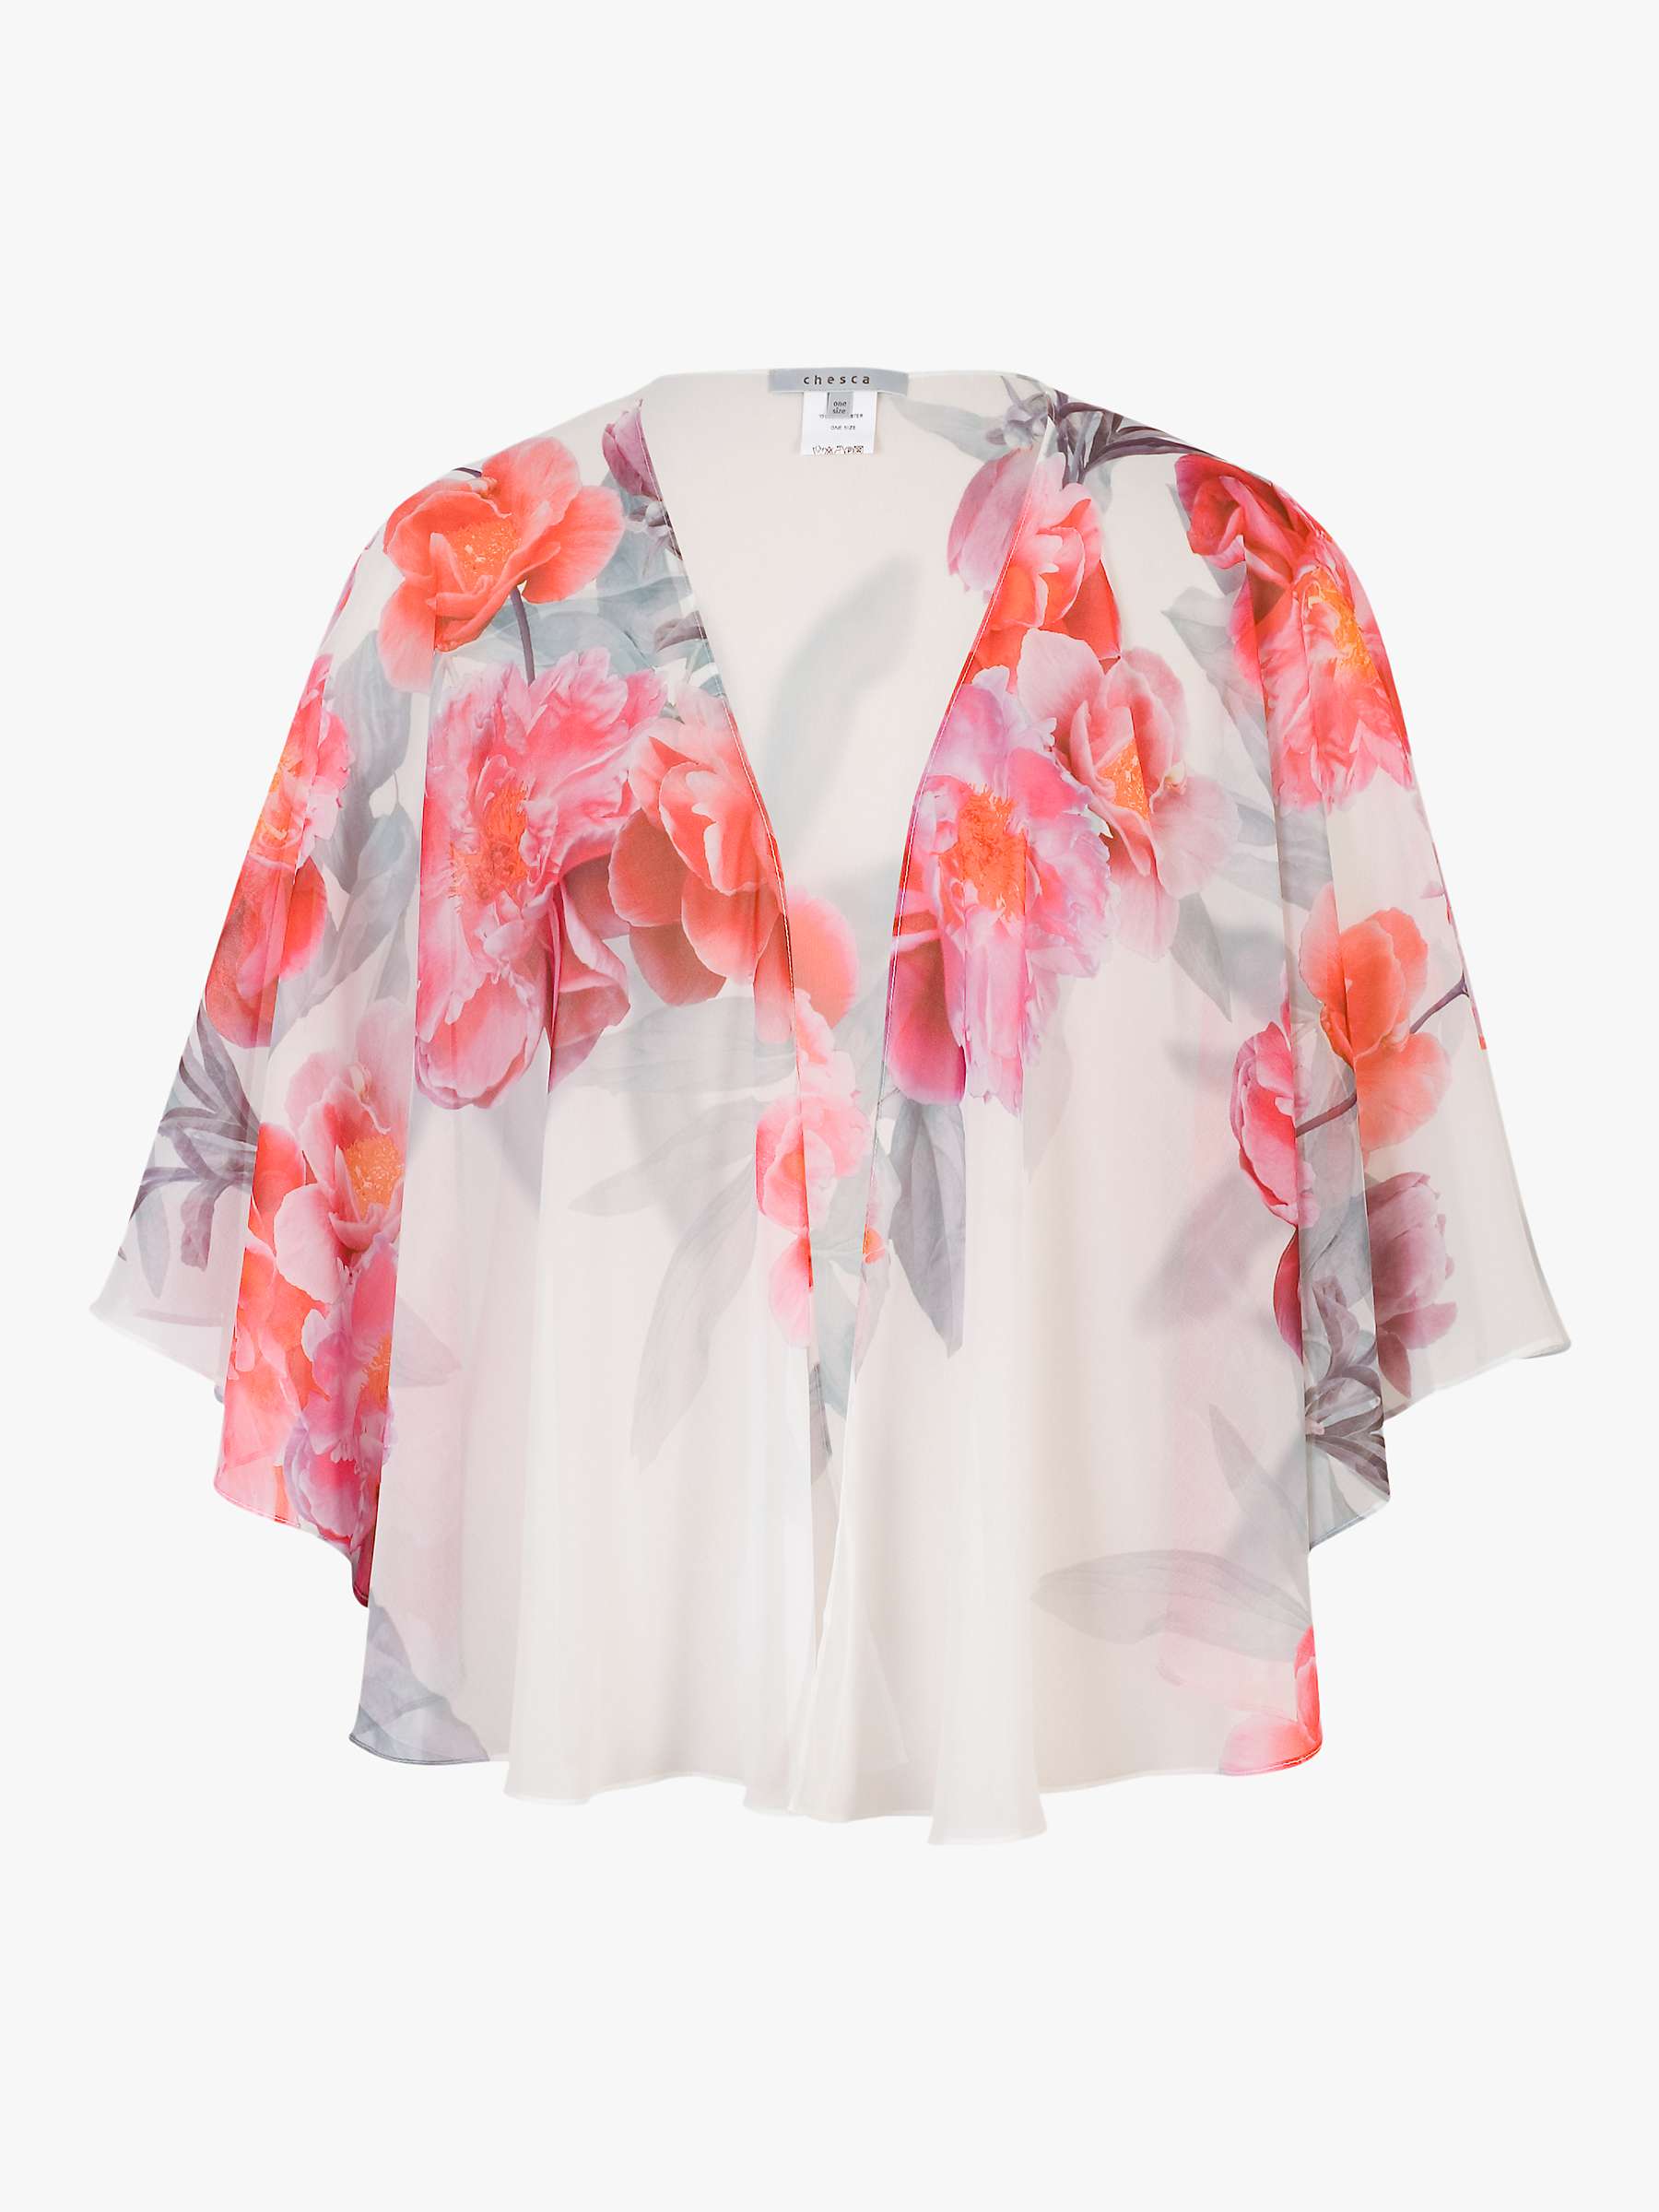 Chesca Chiffon Floral Shawl, Ivory/Pink at John Lewis & Partners